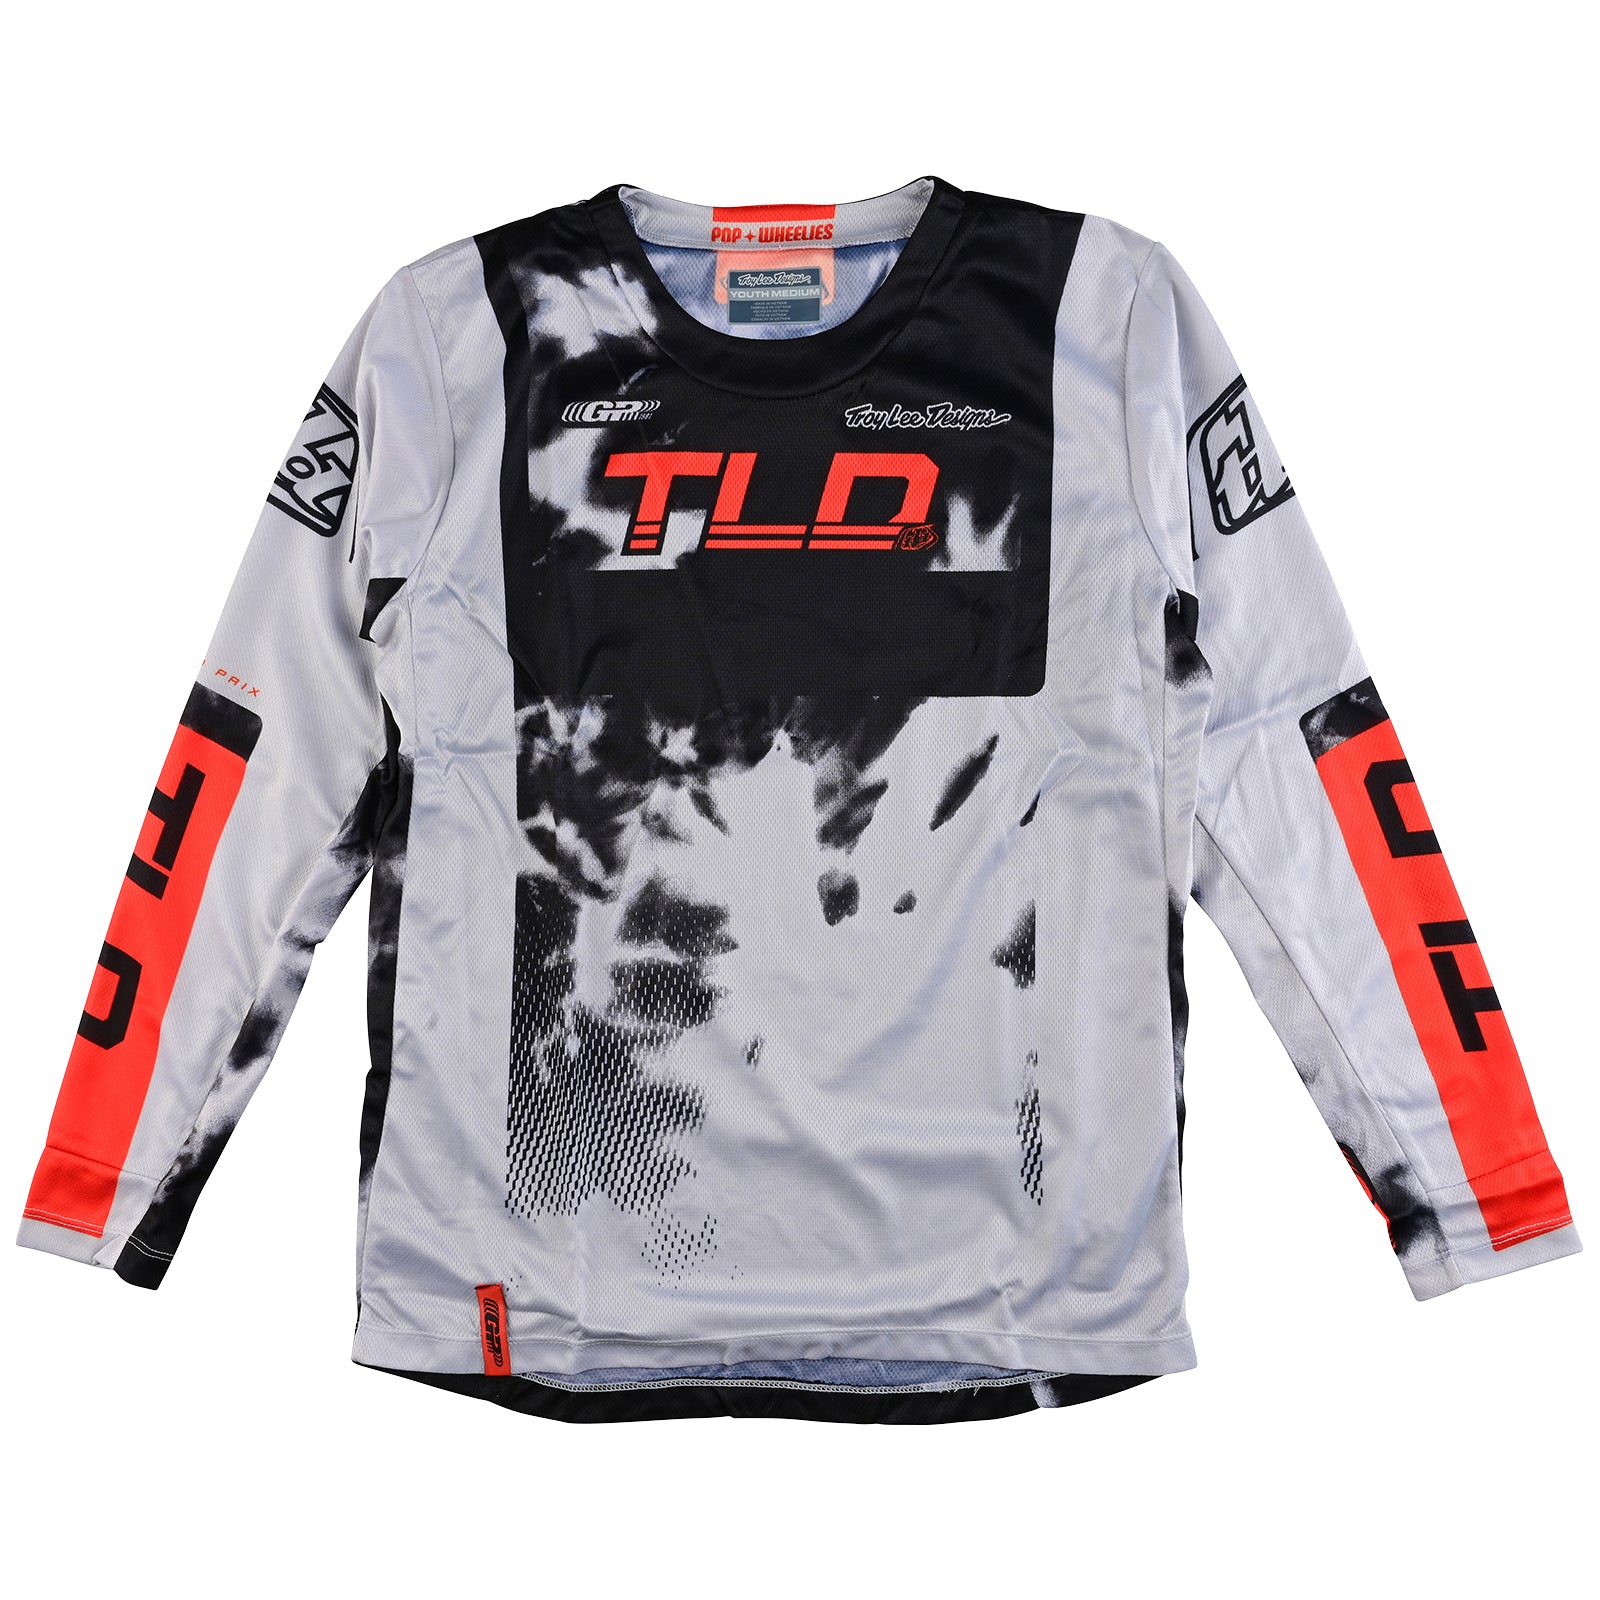 Youth GP Pant Astro Black / Yellow – Troy Lee Designs Canada